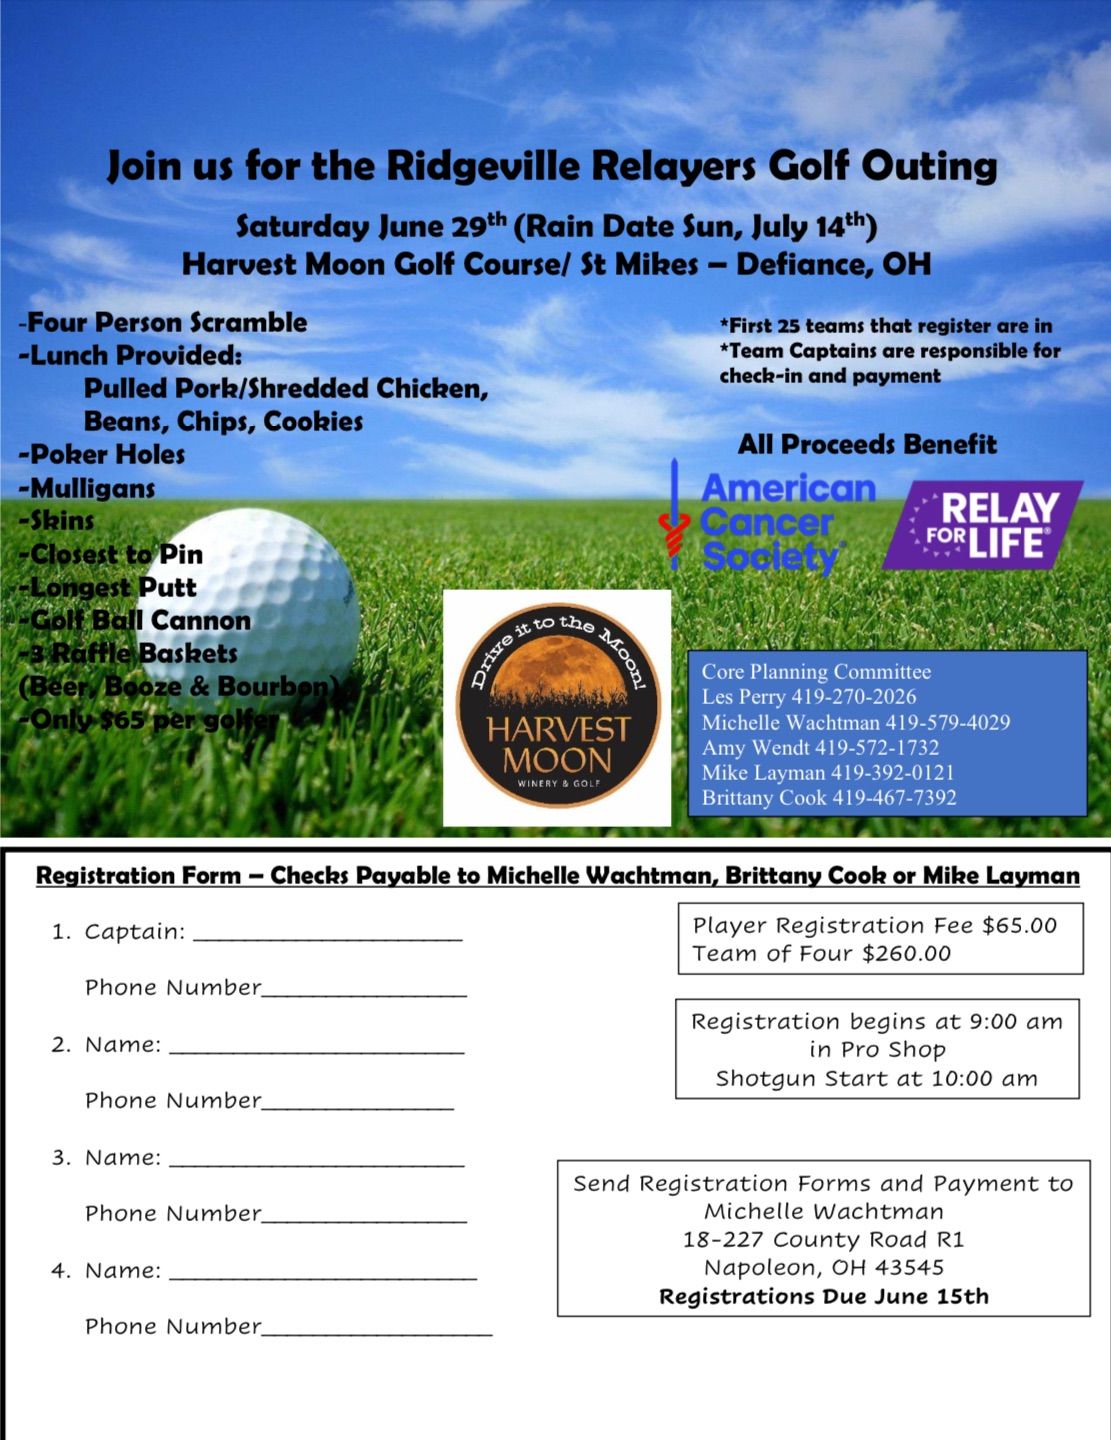 Ridgeville Relayers Golf Outing 